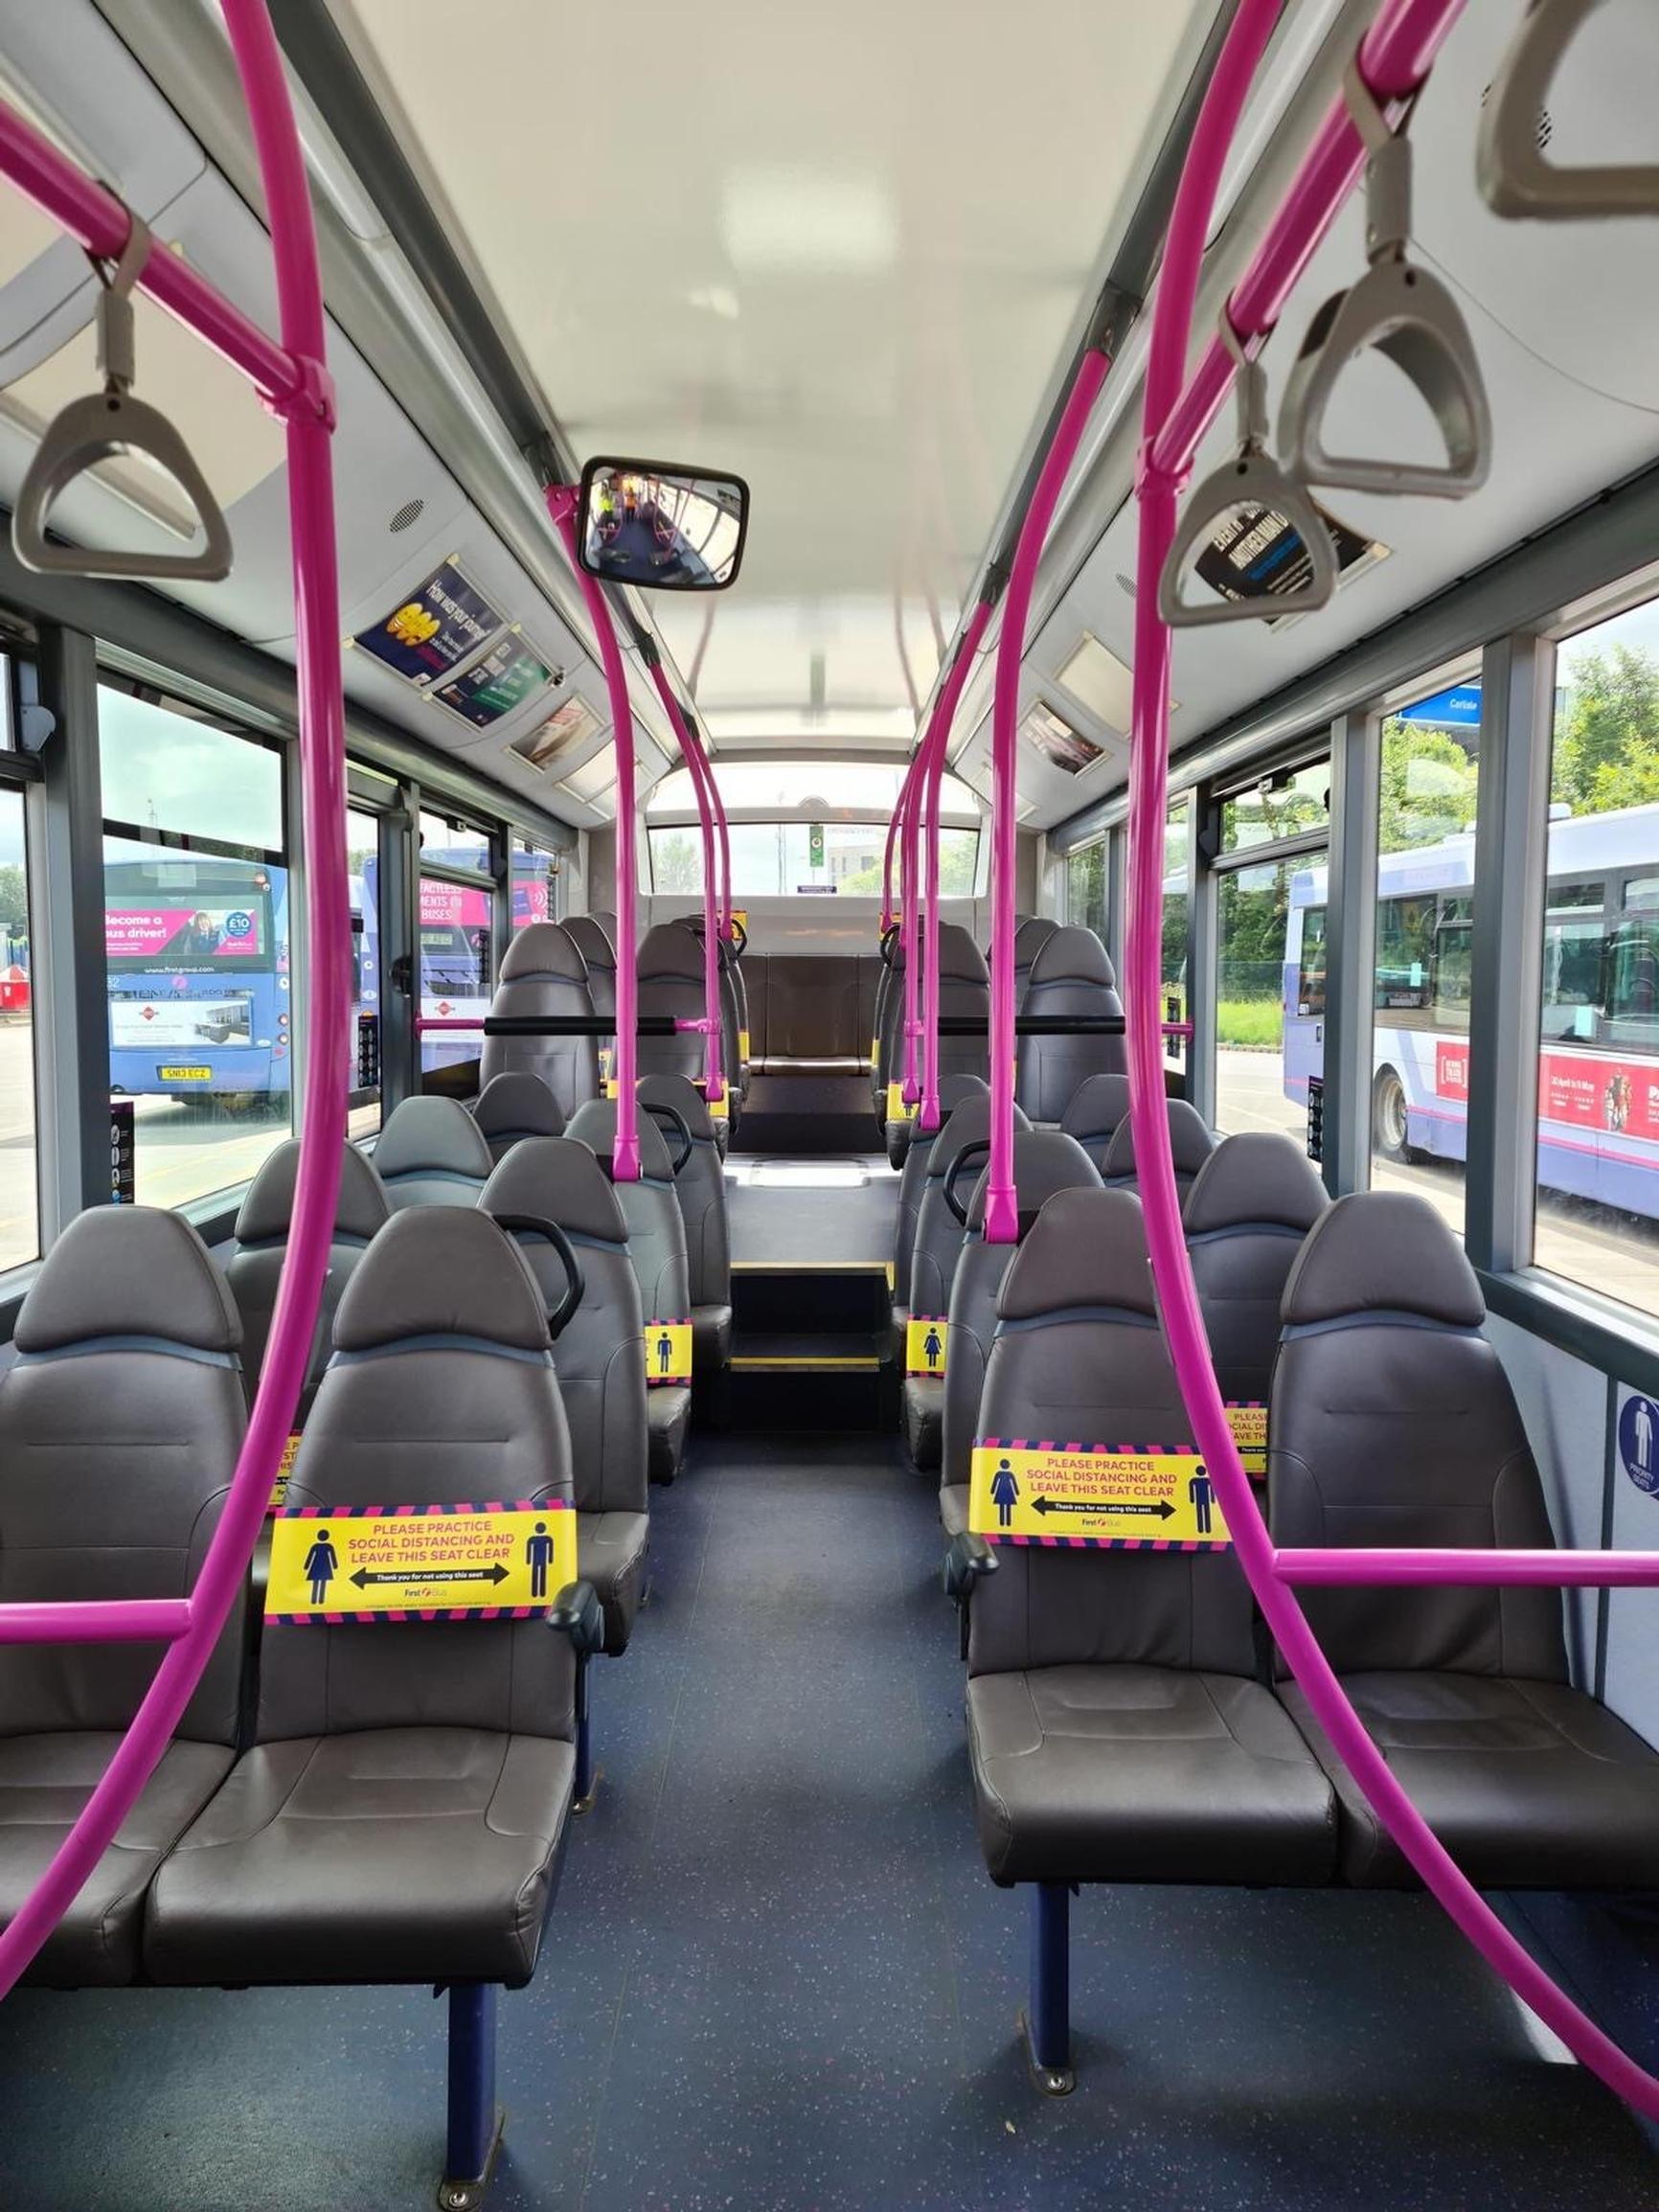 FirstGroup has just increased seating capacity to 50 per cent